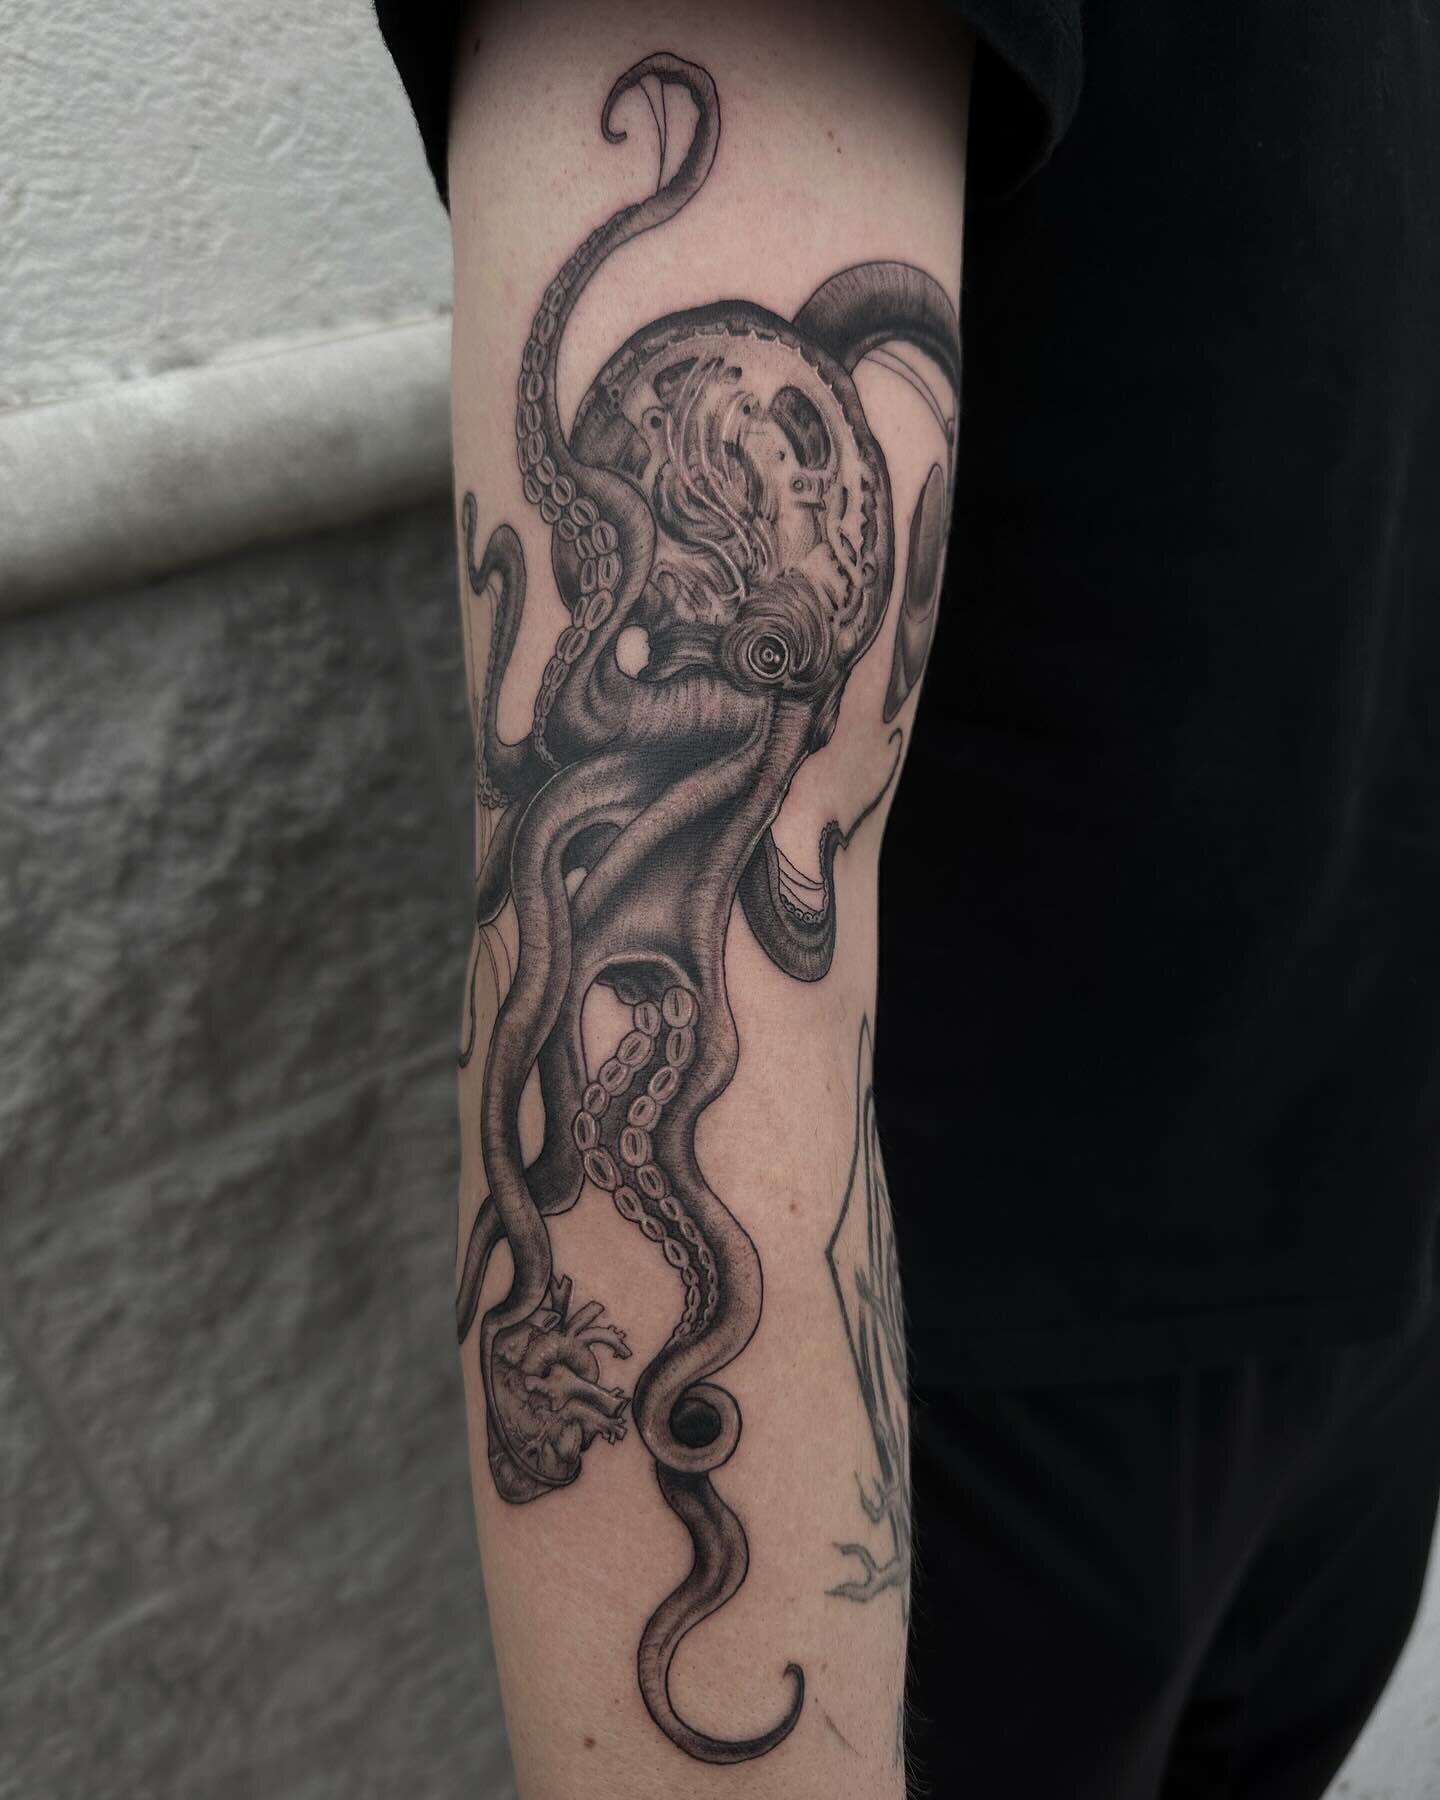 Octopus with a hint of creepy🐙🕸️ I need more plz🥺 #octopus #octopustattoo #blackwork #blackworktattoo #blackandgreytattoo #blackandgrey #nwatattoo #nwatattooartist #nwatattoos #arkansas #arkansastattooartists #arkansastattoos #arkansastattooartist